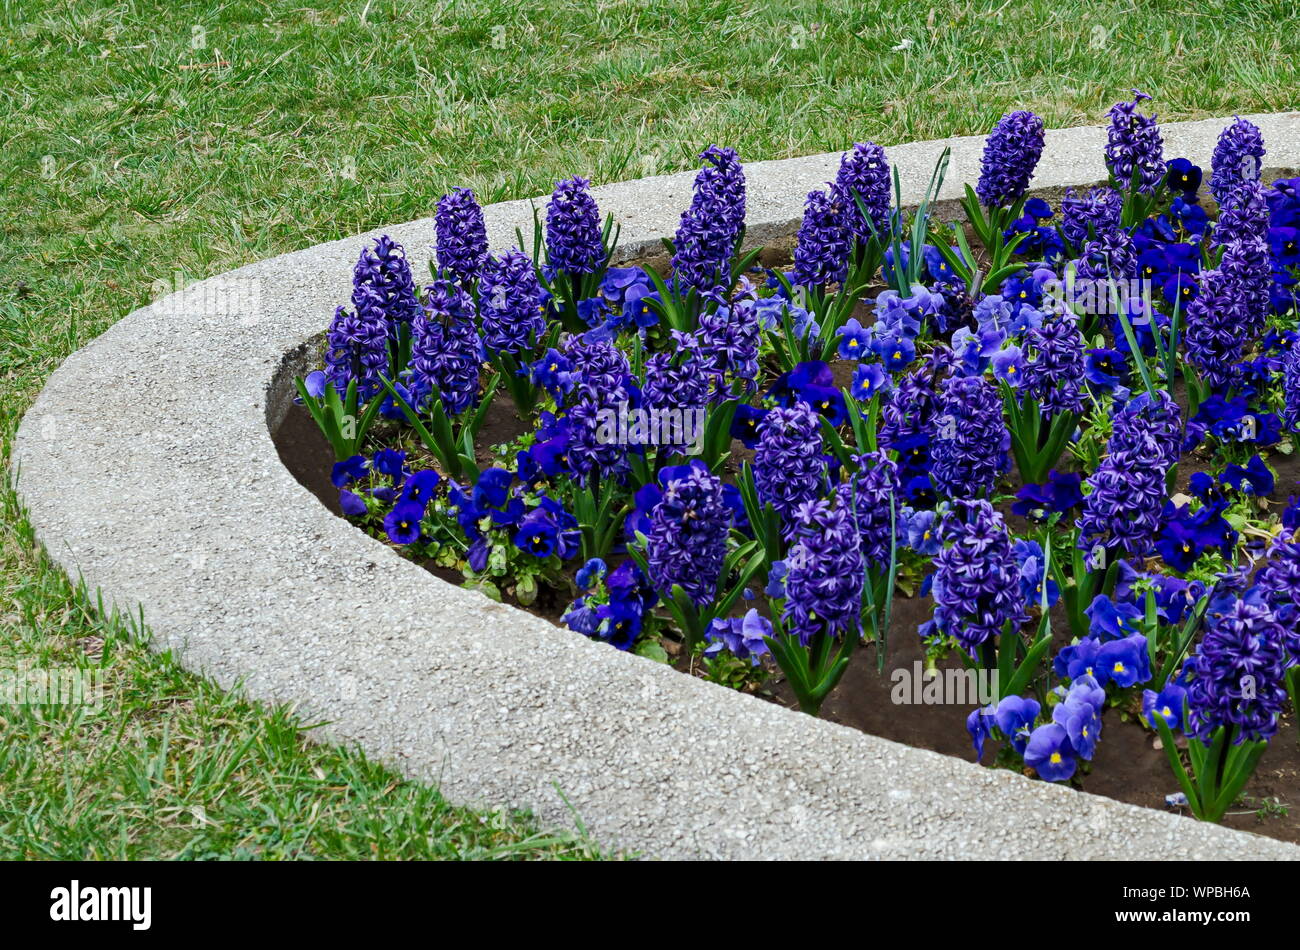 Flowering  garden  with bloom of  blue hyacinth  and pansy or Viola altaica, Sofia, Bulgaria Stock Photo